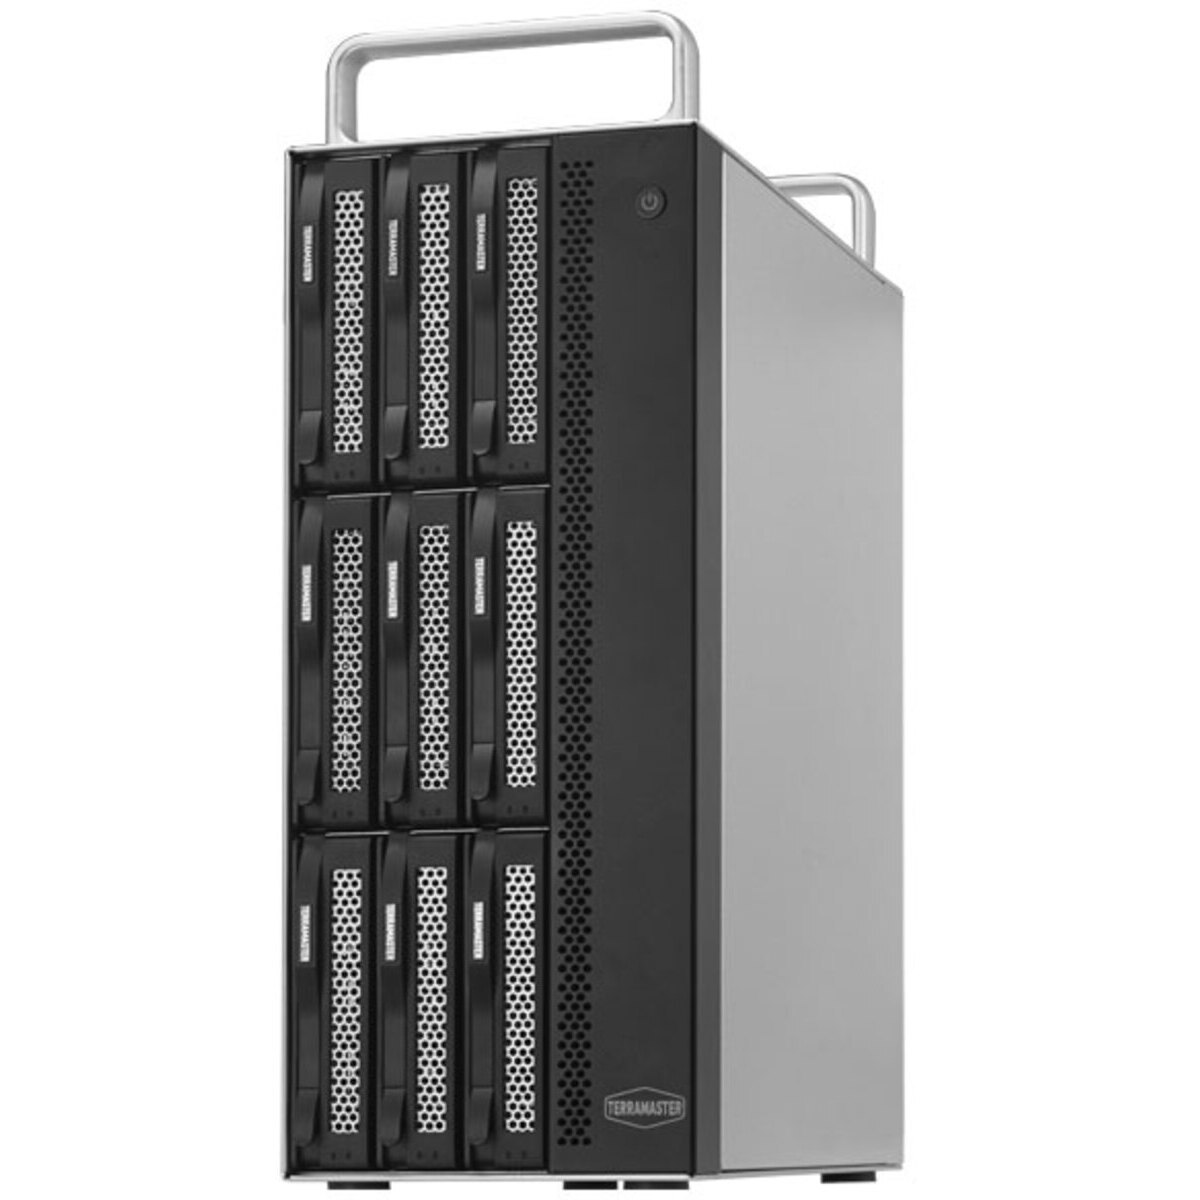 TerraMaster D8-322 56tb 8-Bay Desktop Multimedia / Power User / Business DAS - Direct Attached Storage Device 7x8tb TeamGroup EX2 Elite T253E2008T0C101 2.5 550/520MB/s SATA 6Gb/s SSD CONSUMER Class Drives Installed - Burn-In Tested D8-322